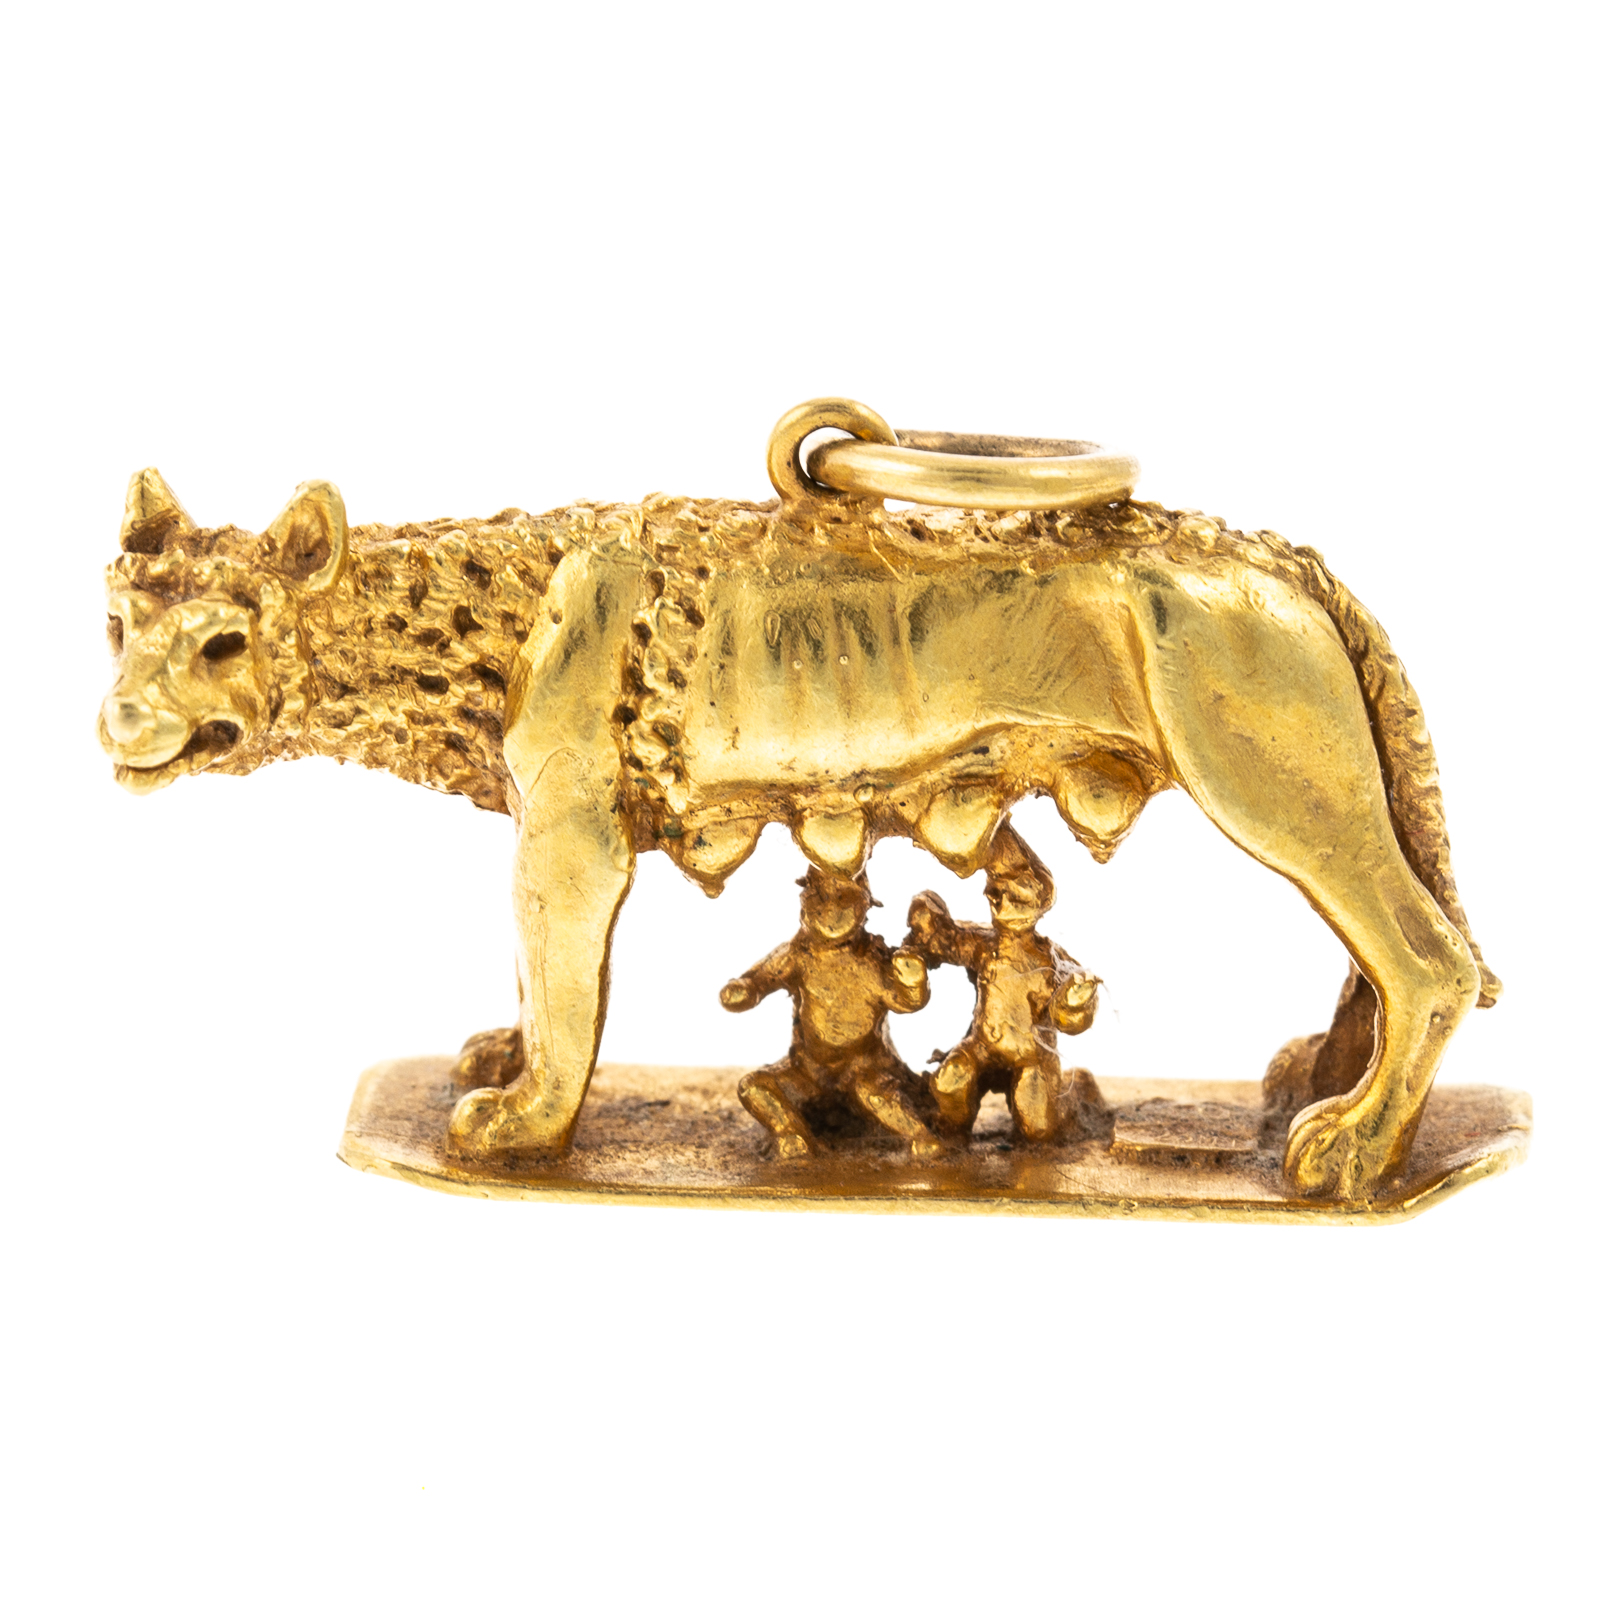 A SOLID 18K YELLOW GOLD ROMULUS